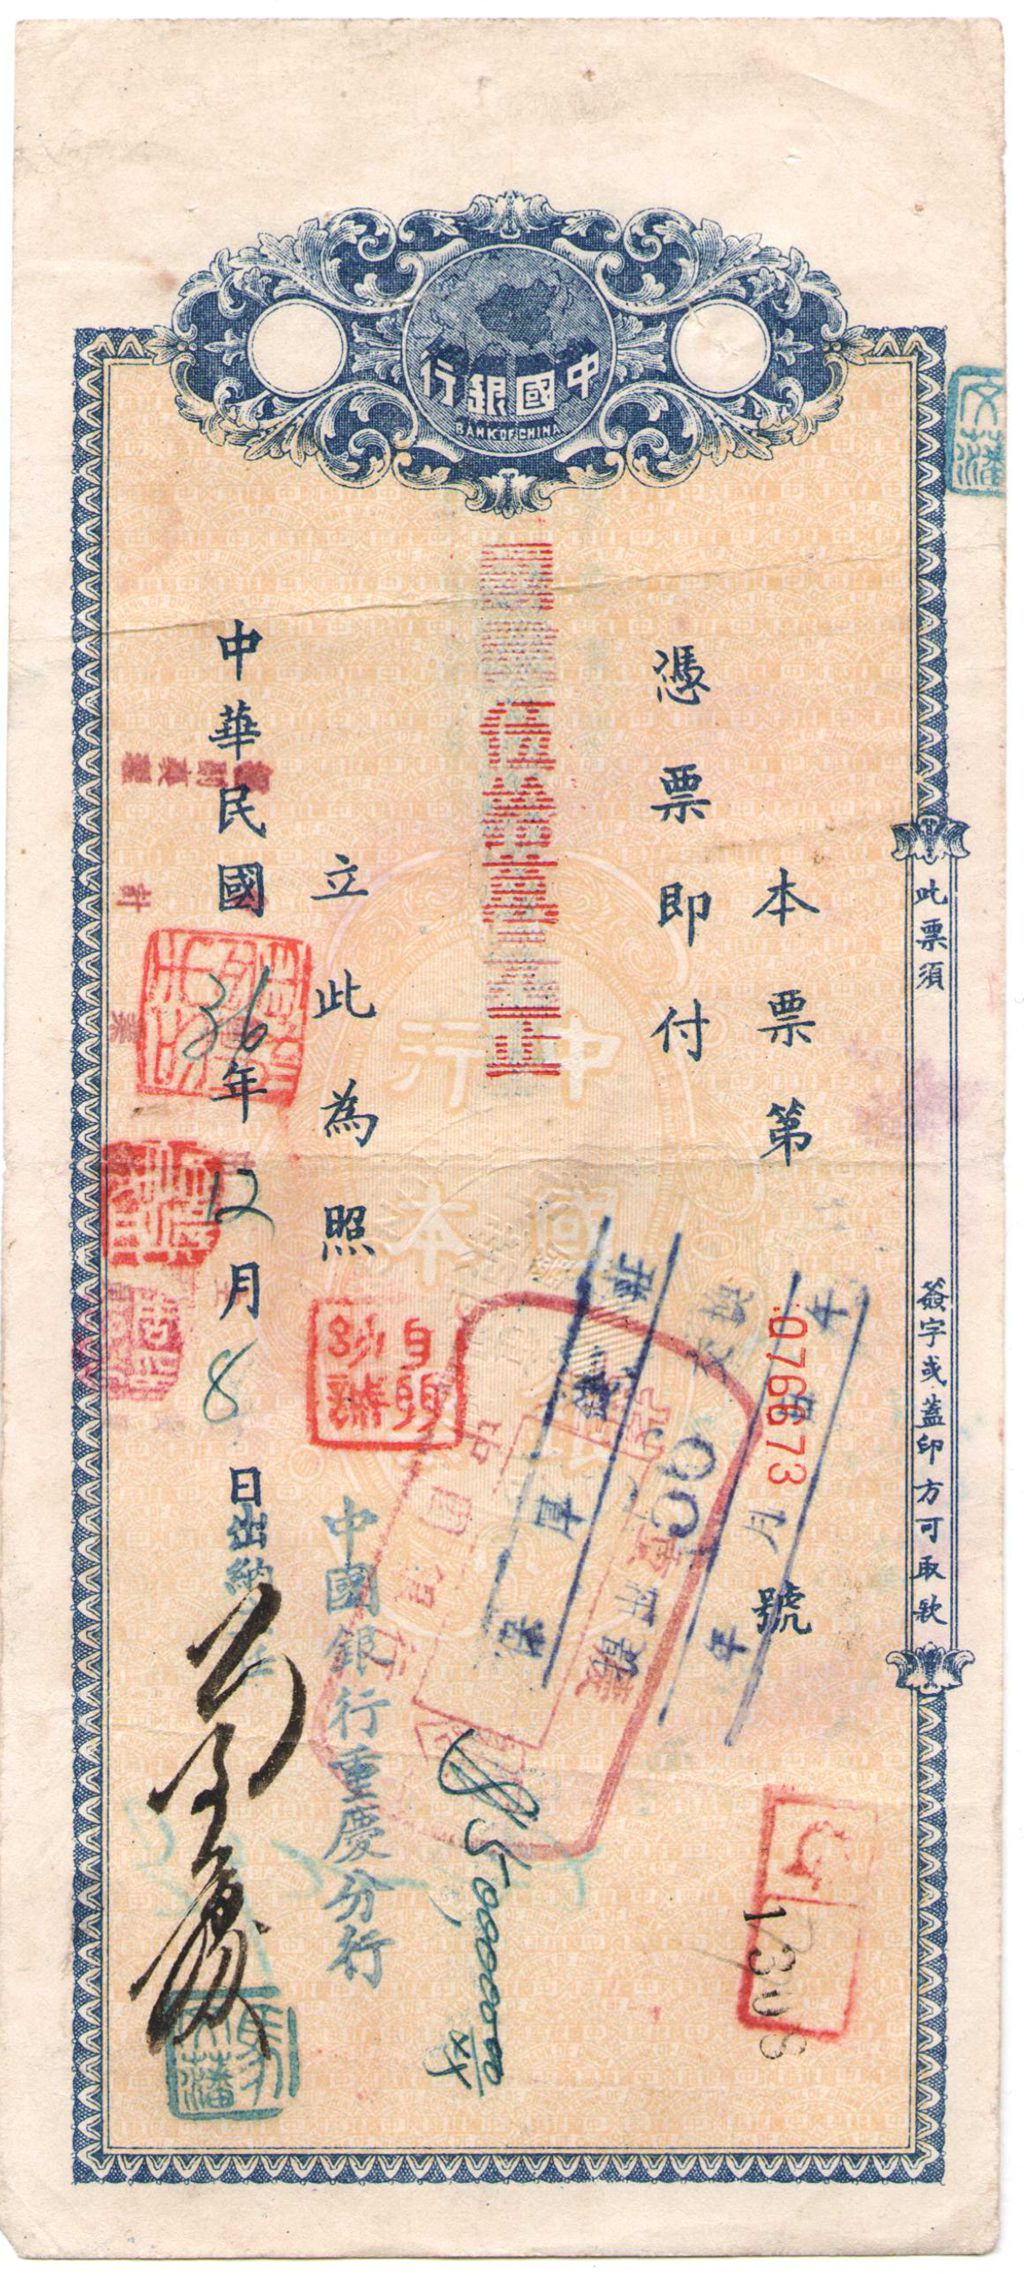 D3131, Bank of China, Cash Promissory Note 500,000 Dollars, 1947